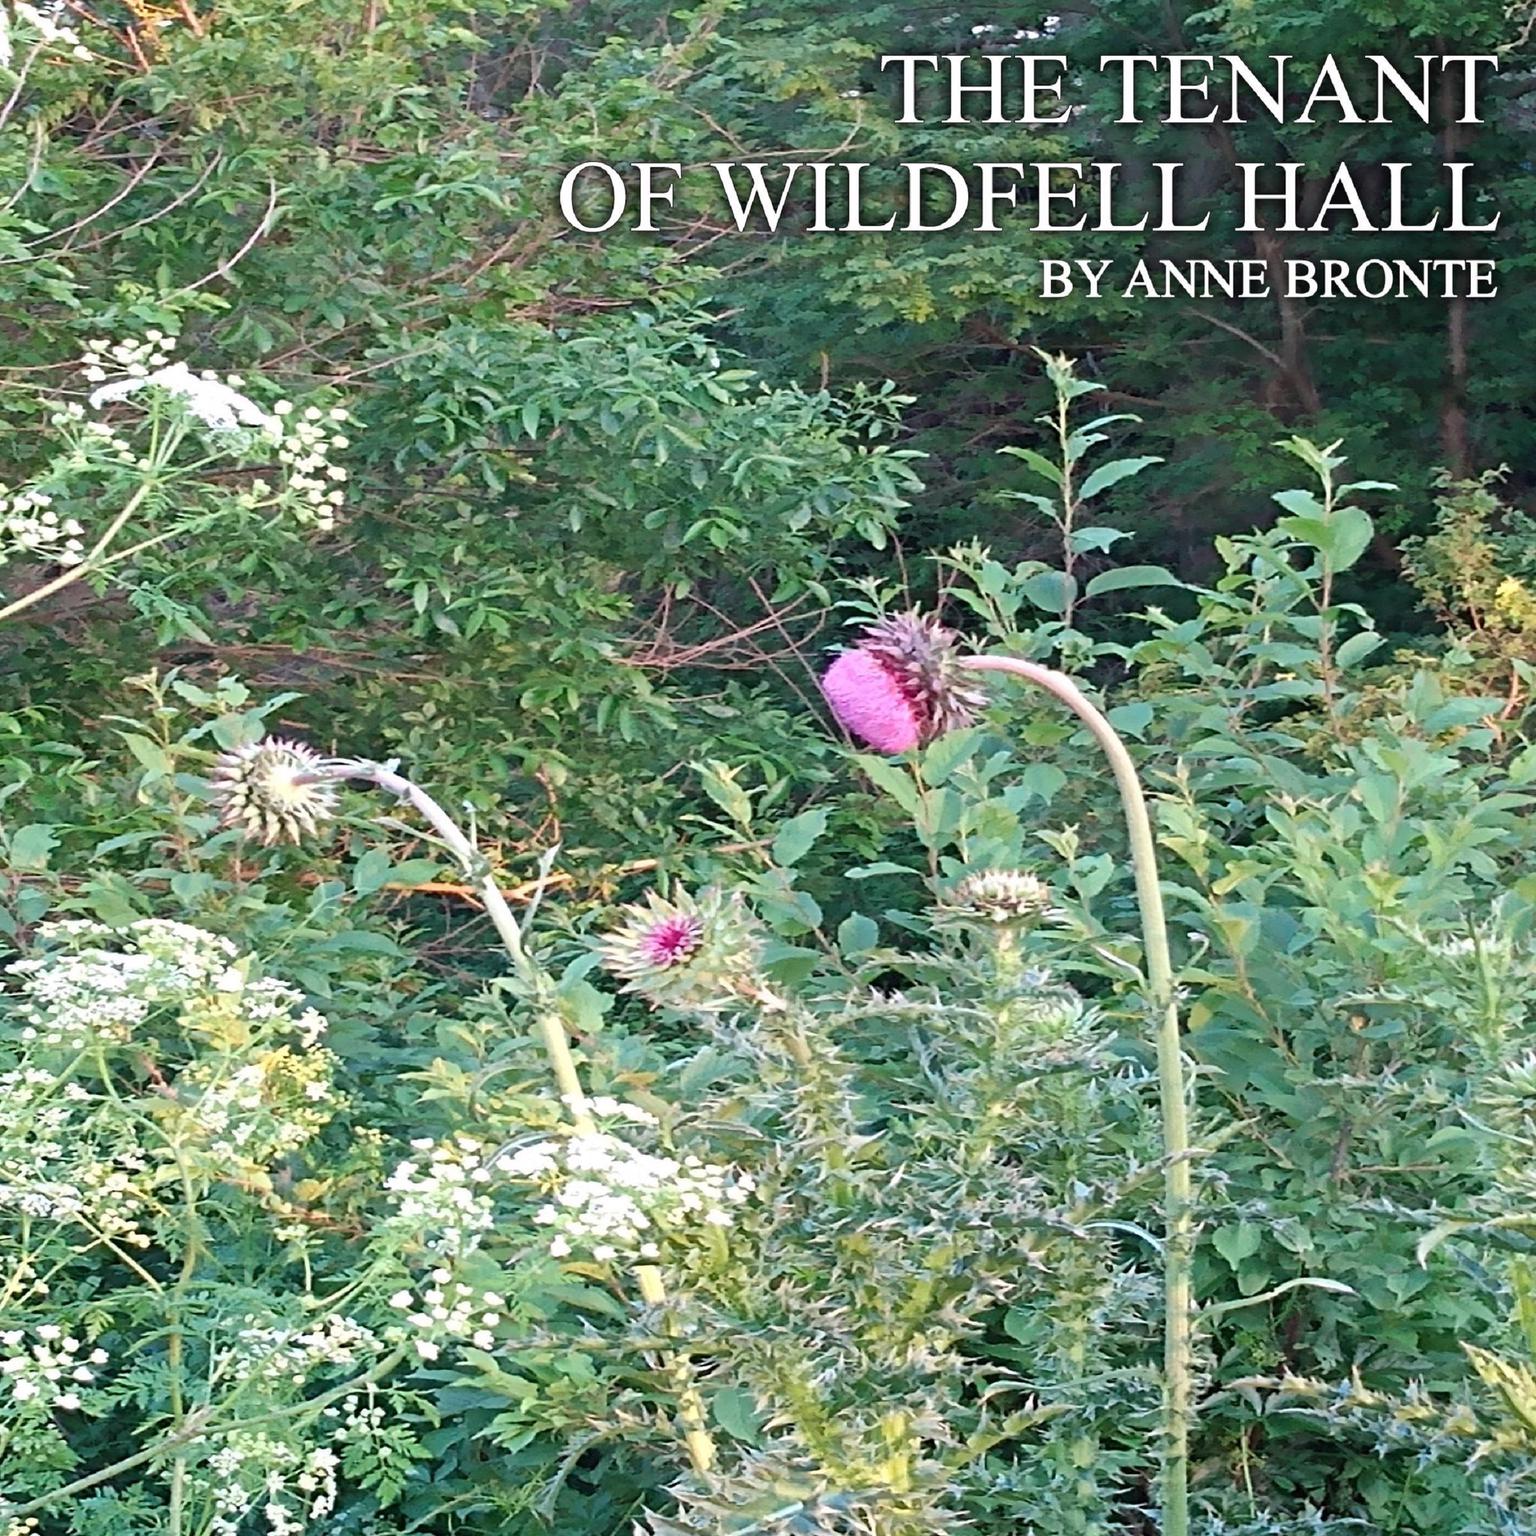 The Tenant of Wildfell Hall (Abridged) Audiobook, by Anne Brontë